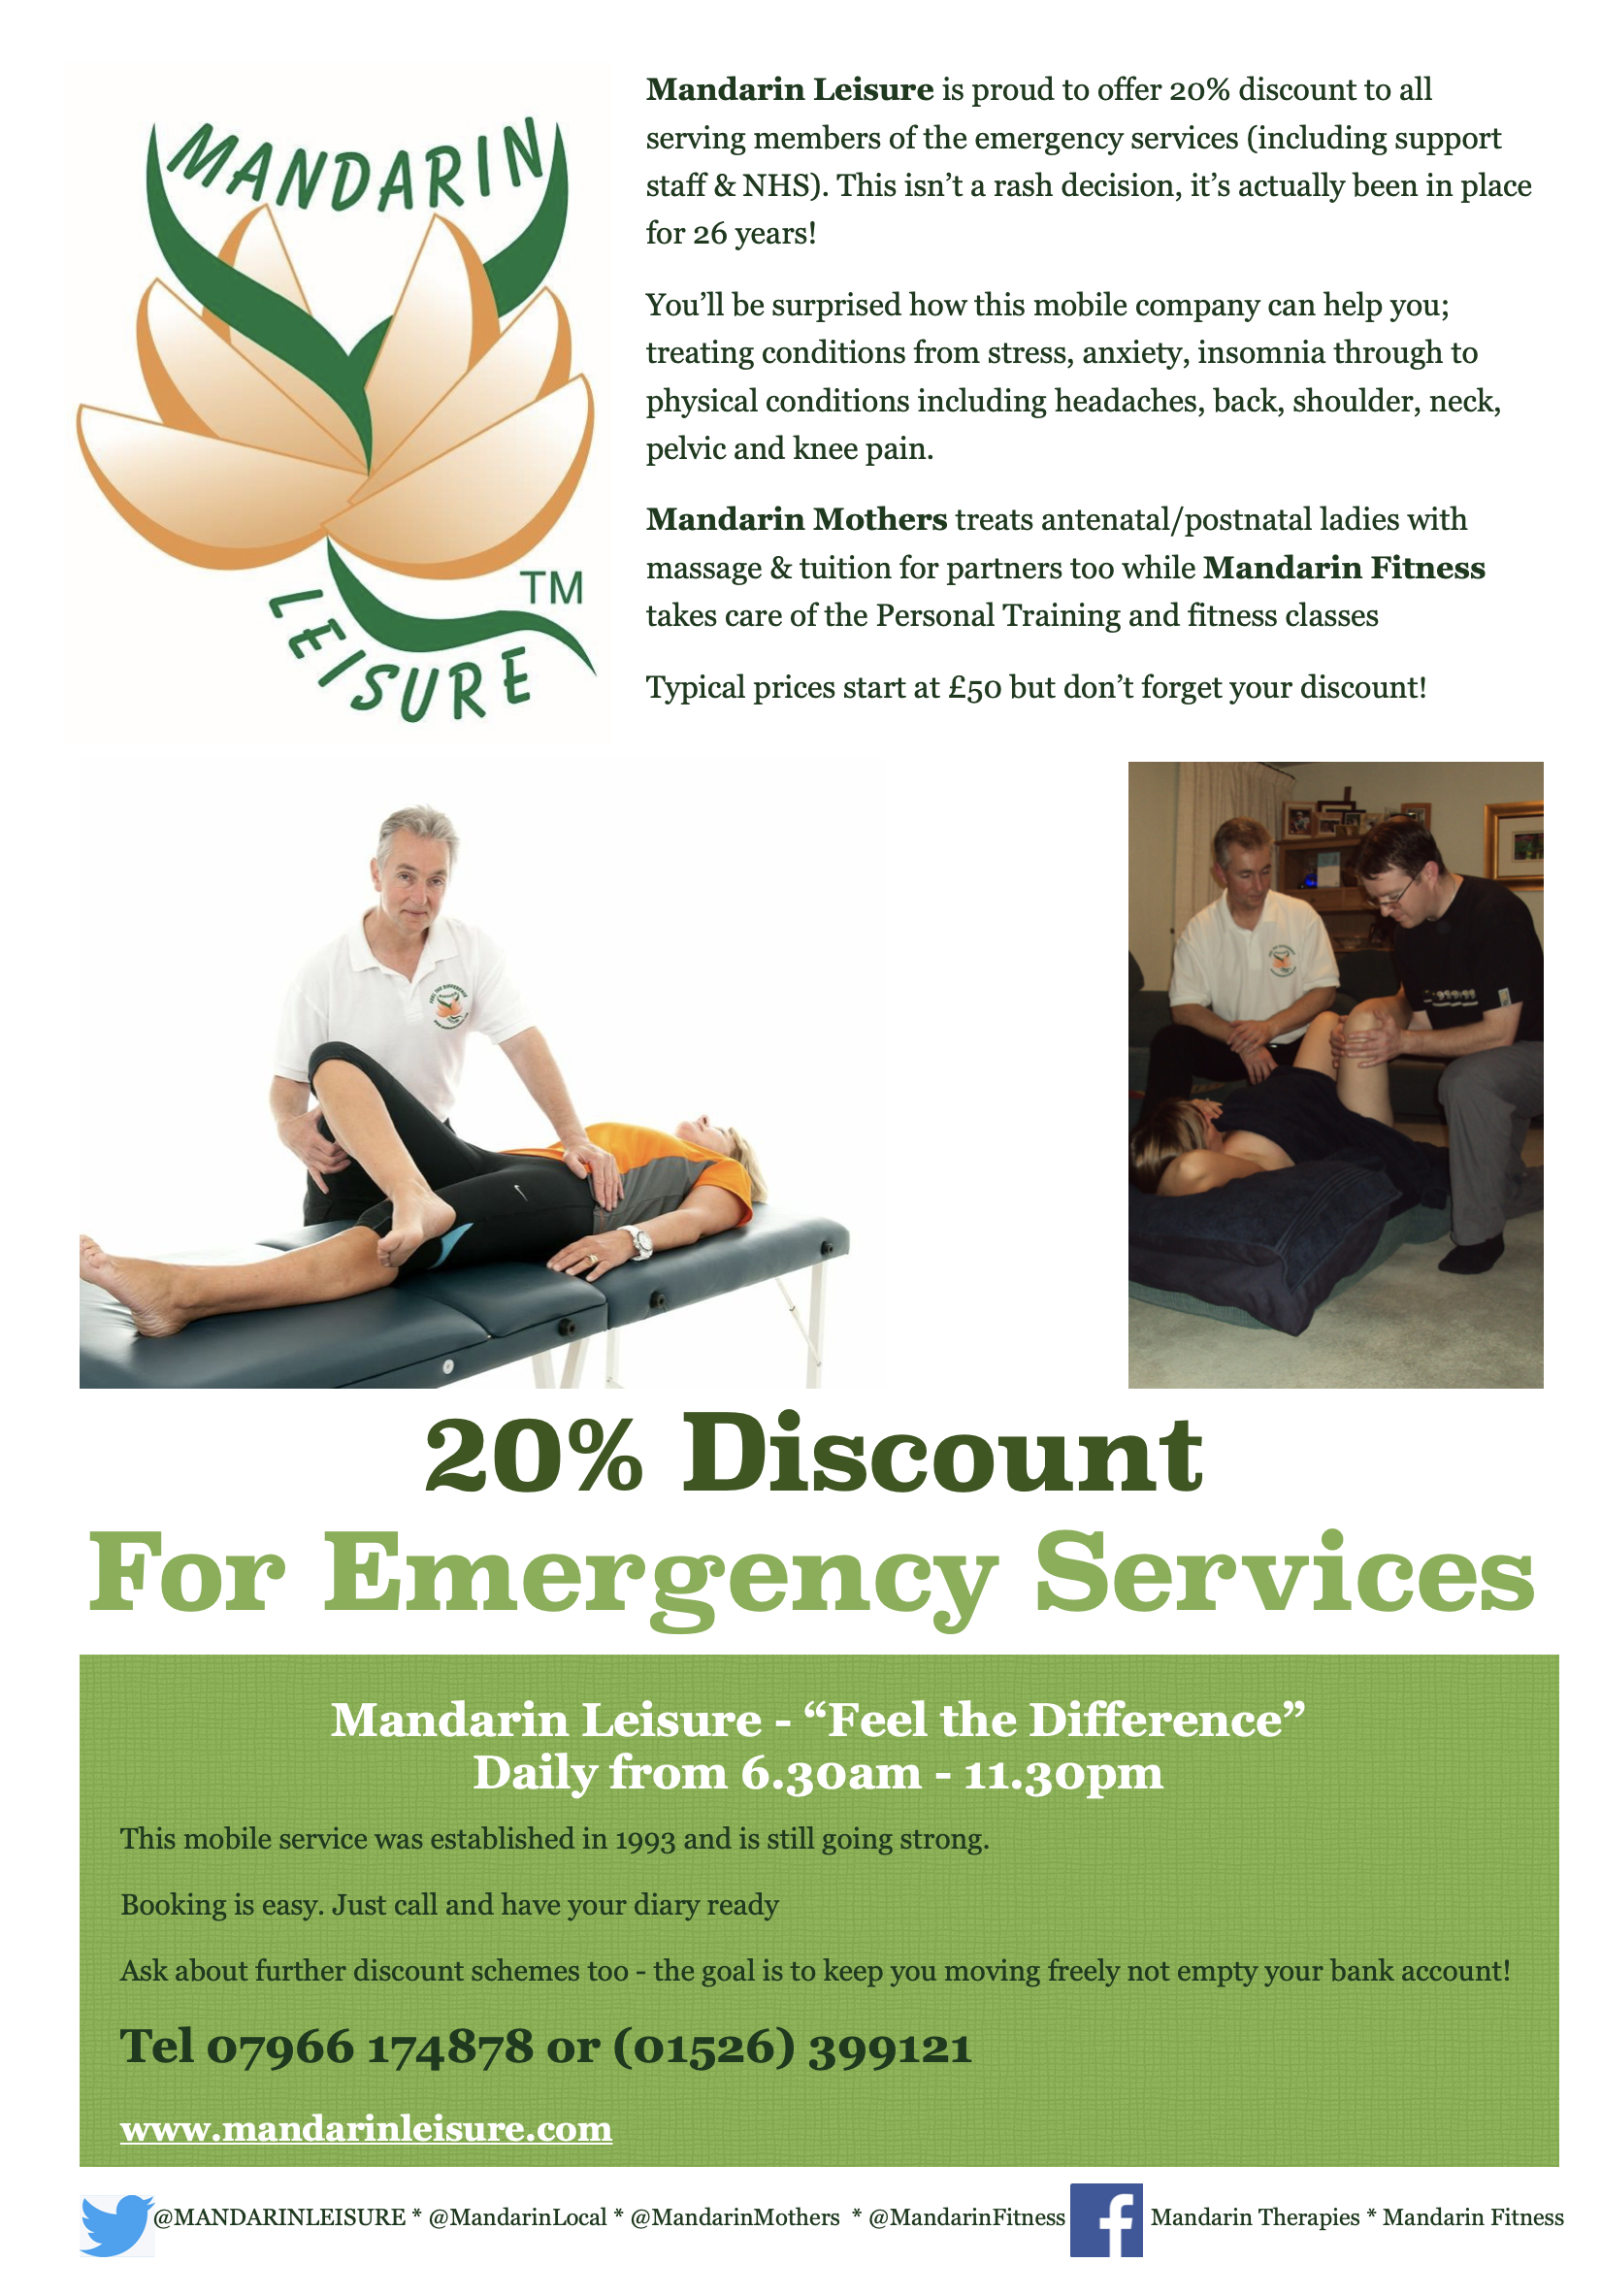 LincsConnect Mandarin Leisure discount for emergency services, armed forces and veterans 